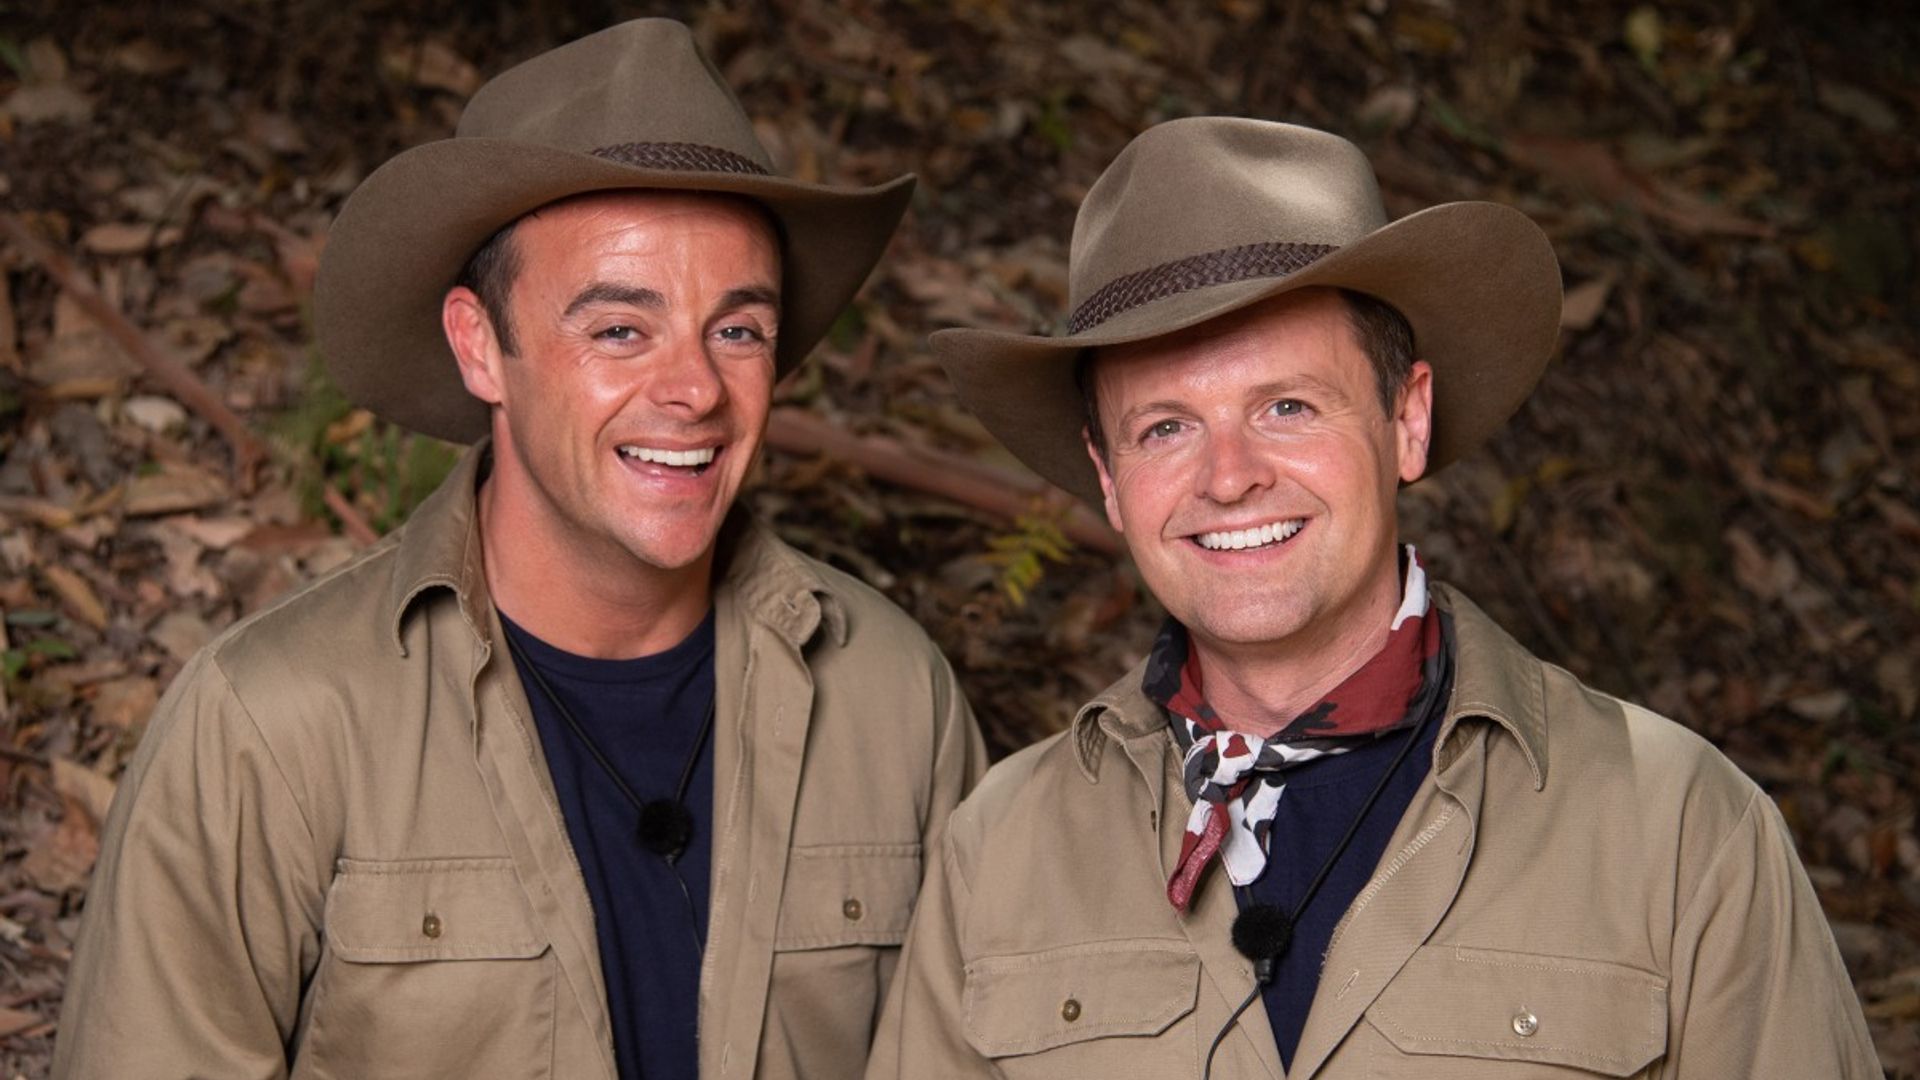 I’m a Celebrity’s 2021 location confirmed - will the show return to Australia? 